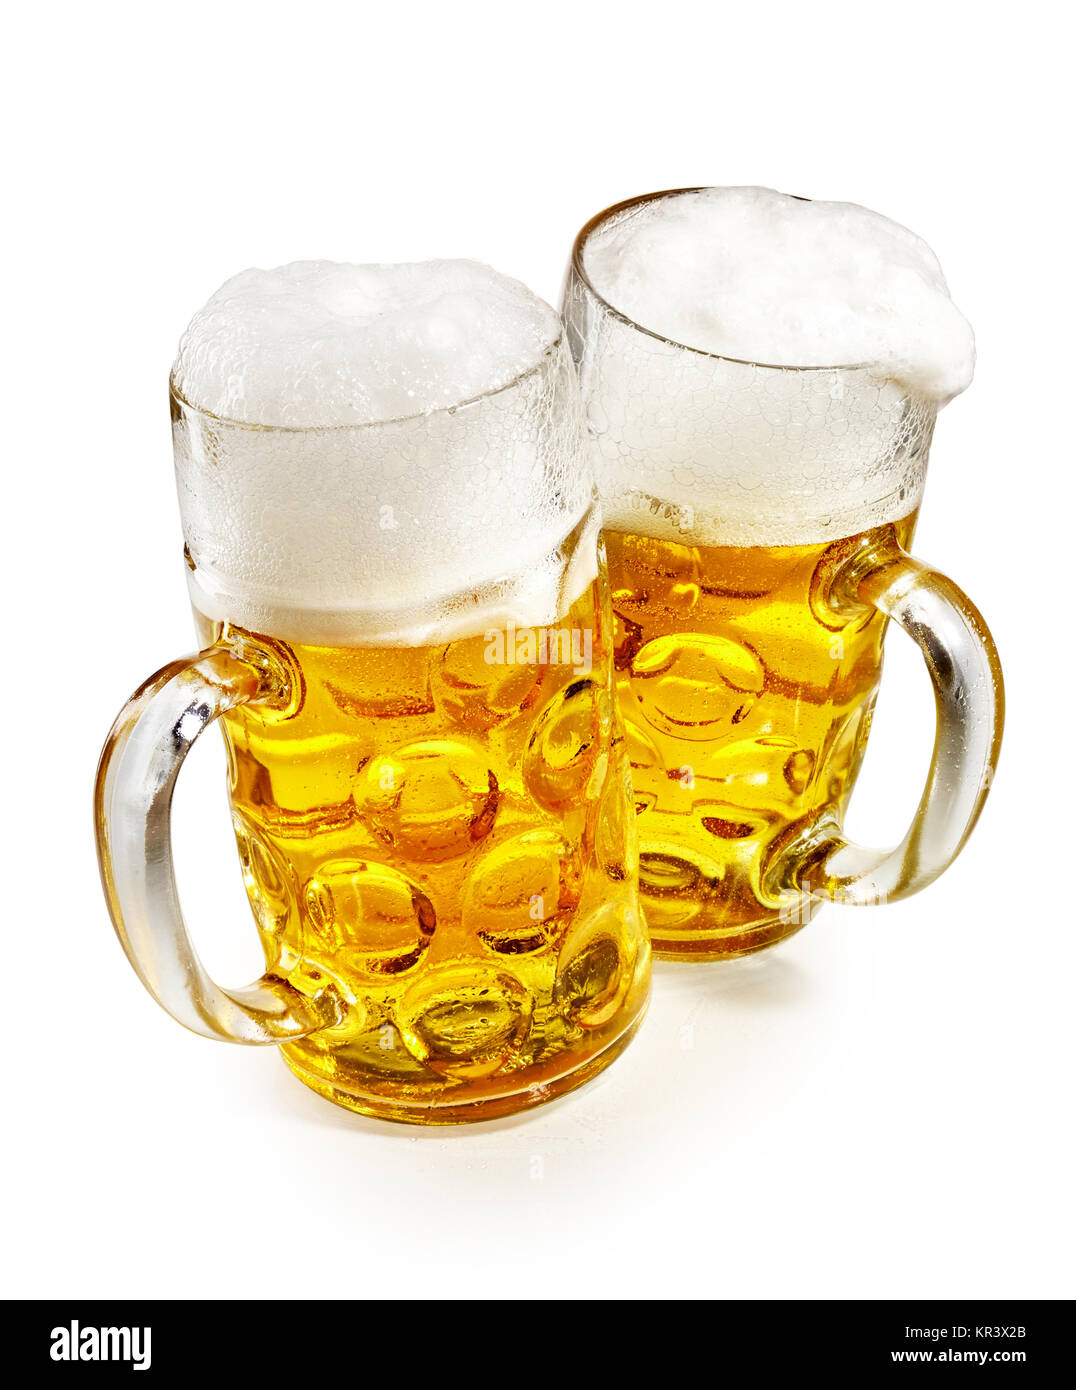 https://c8.alamy.com/comp/KR3X2B/two-pint-mugs-of-glowing-golden-frothy-cold-beer-viewed-high-angle-KR3X2B.jpg